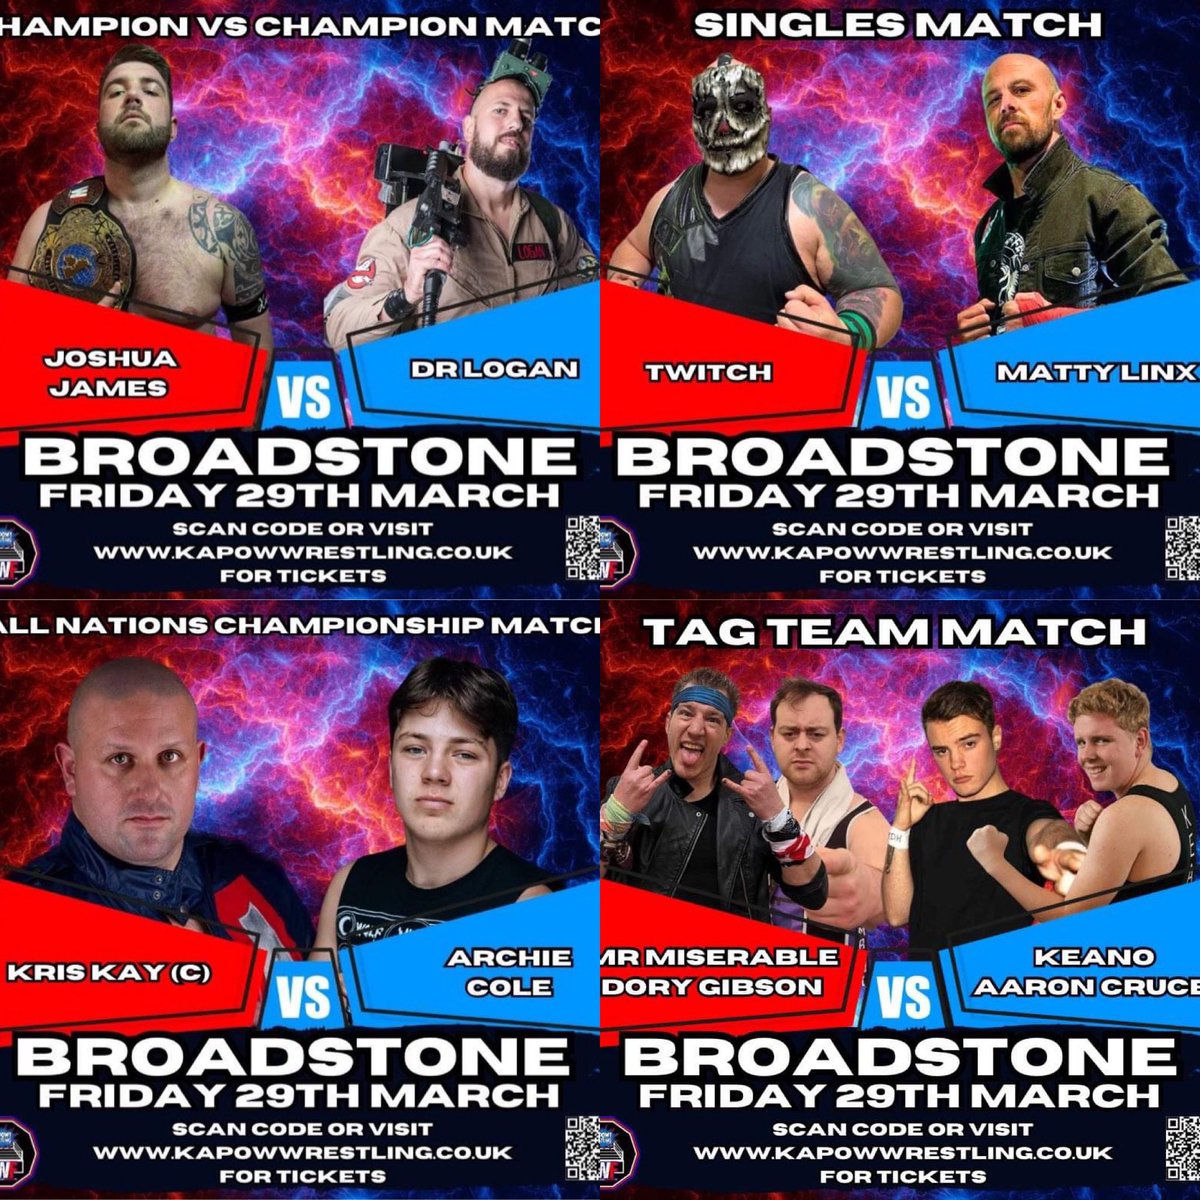 #tonight in #broadstone near #poole #dorset we have a stellar line up of matches for you. @joshuajames_jj vs @wrestling_ghostbuster in a championship showdown. So much more for you this #goodfriday #wrestling #wrestler #wwe #tna #aew #familyfun